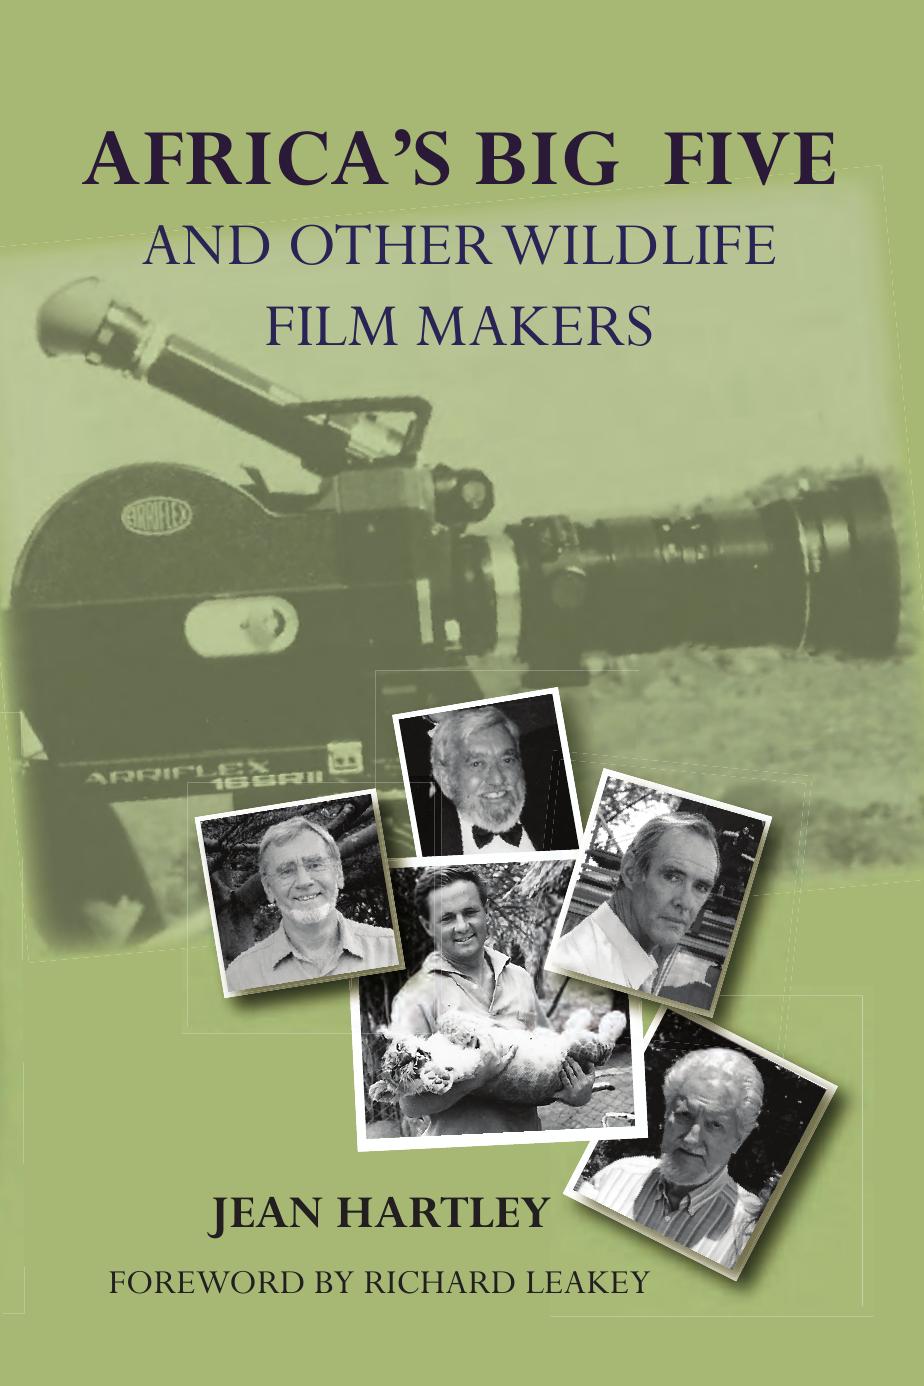 Africa's Big Five and Other Wildlife Filmmakers: A Centenary of Wildlife Filming in Kenya by Jean Hartley